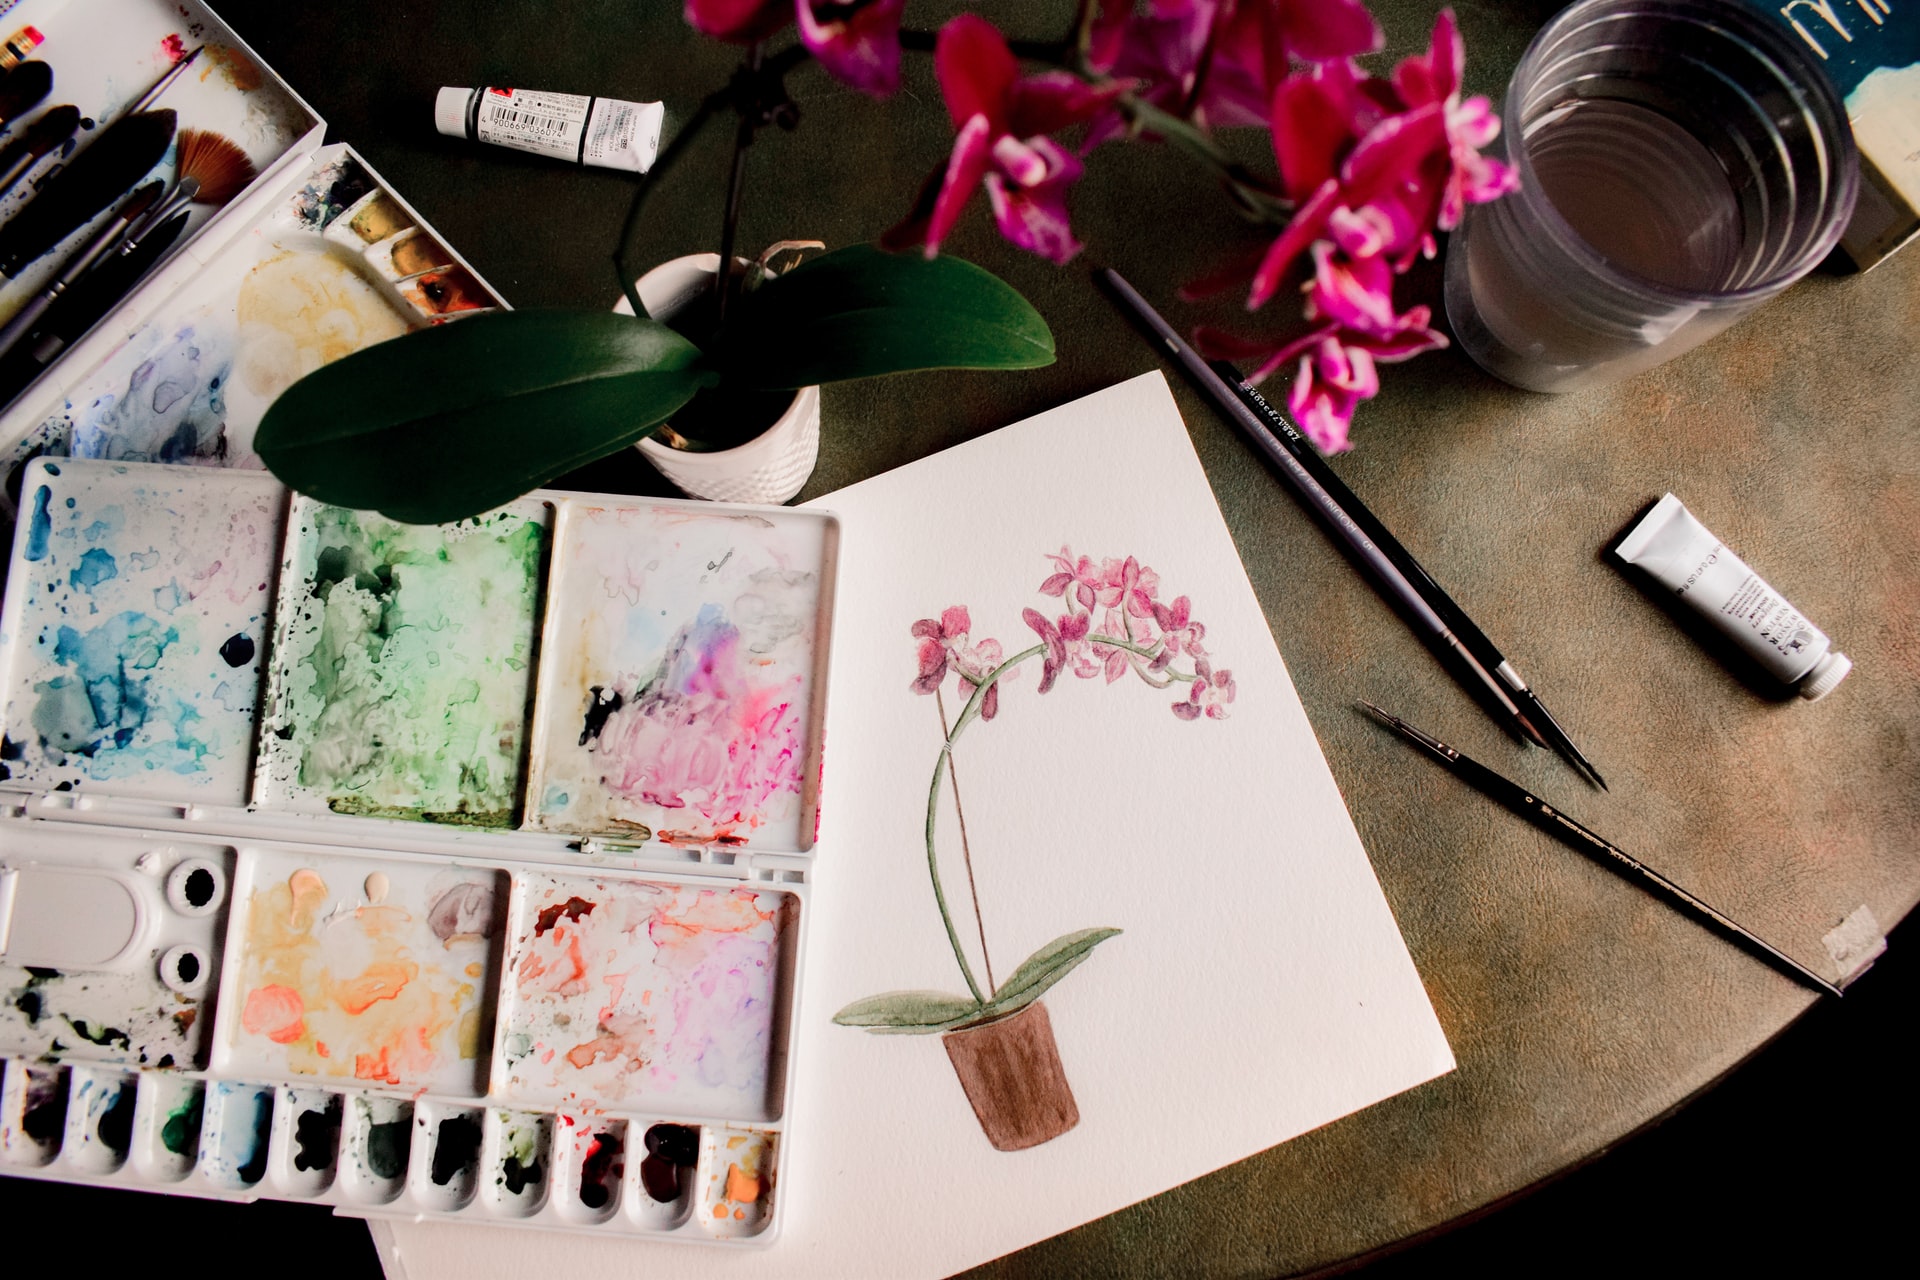 18 essential watercolour techniques for every artist